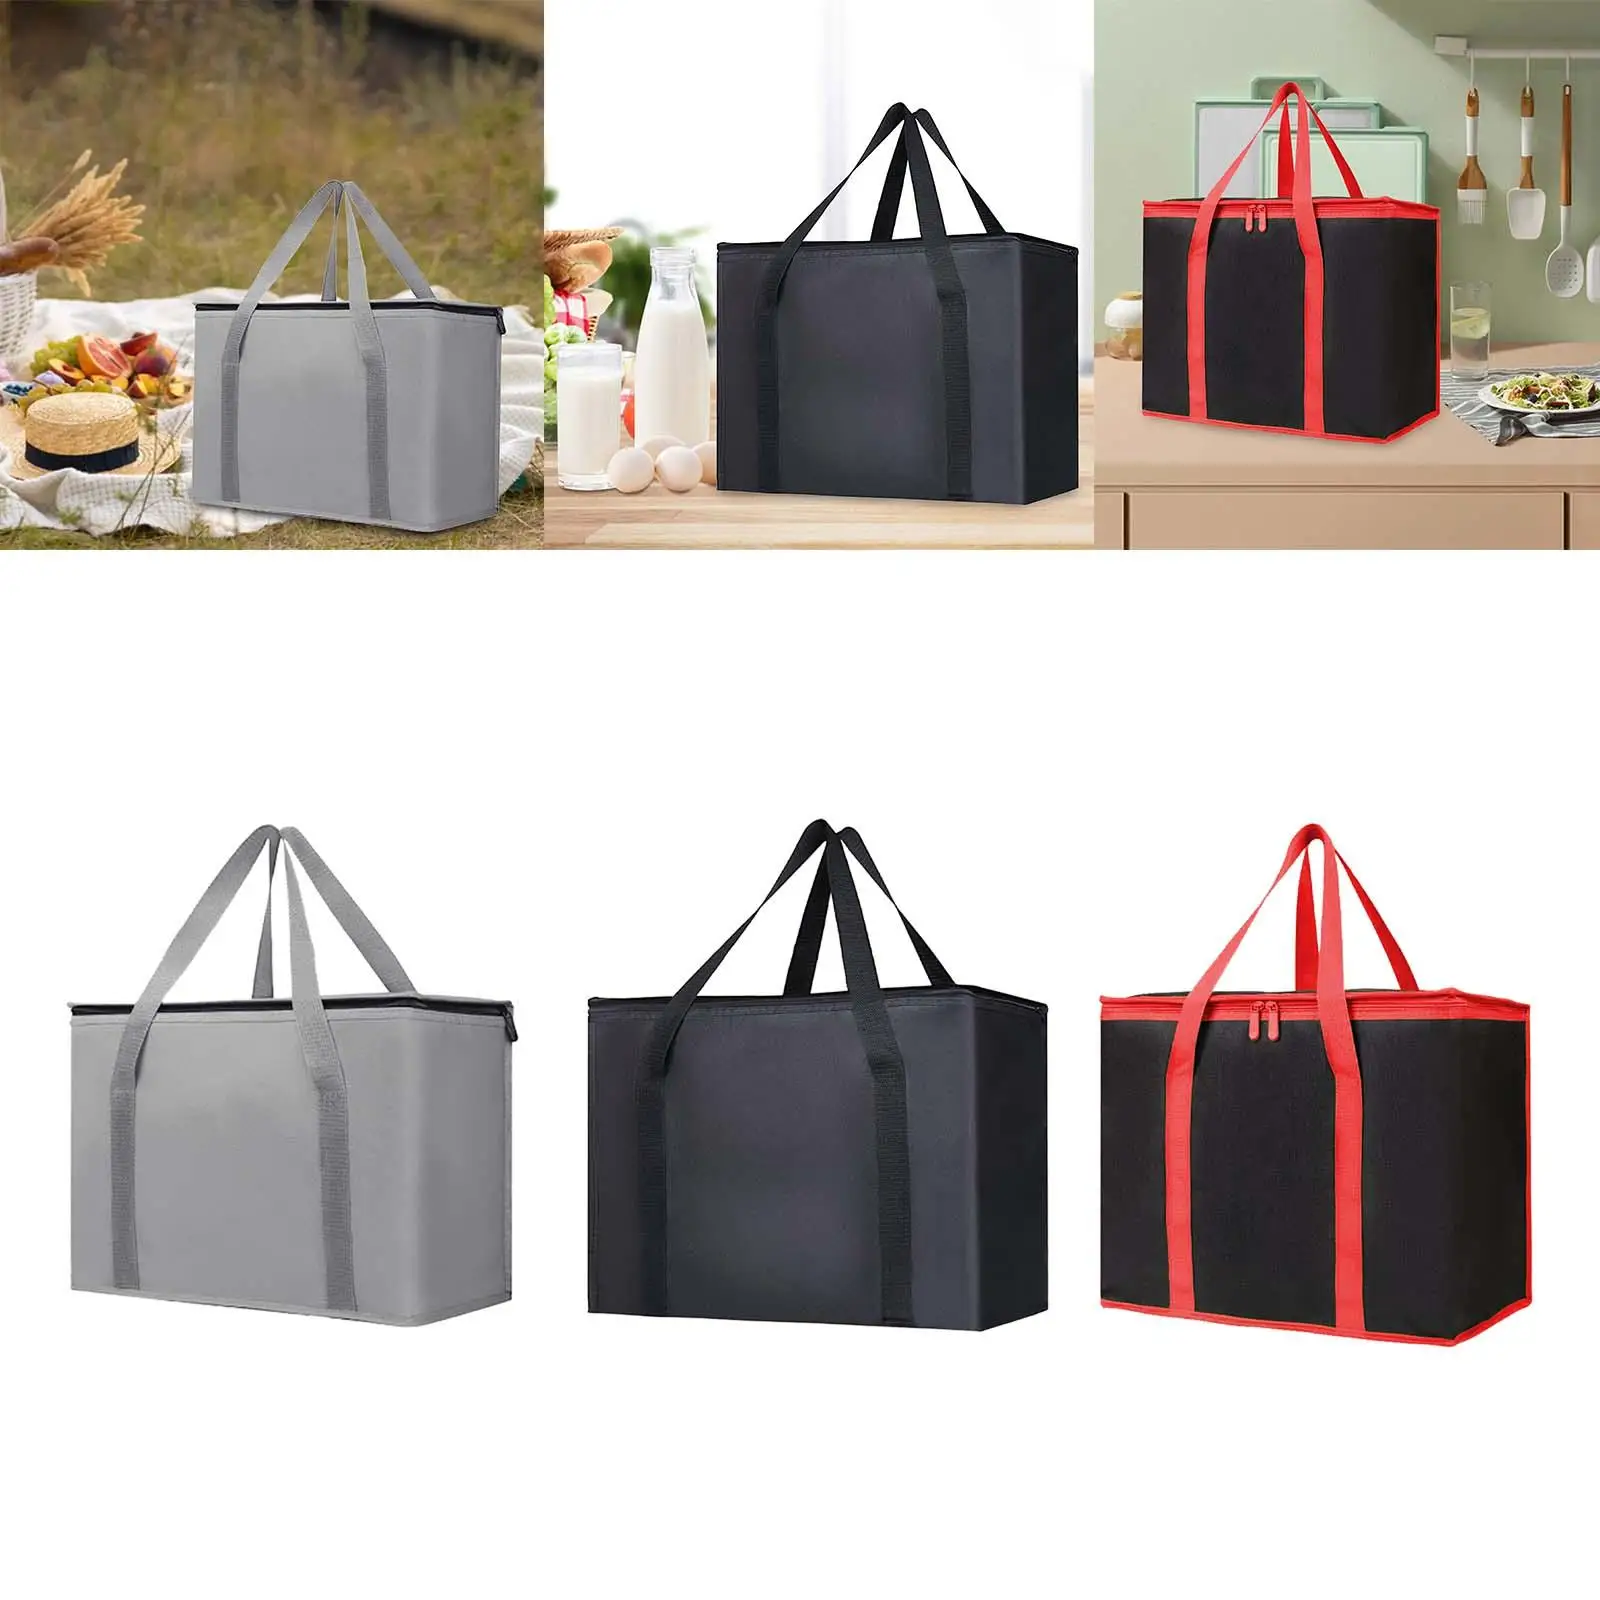 Insulated Cooler Bag Zipper Non Woven Thermal Food Delivery Bag Grocery Shopping Bag for Beach Camping Travel Outdoor Picnic